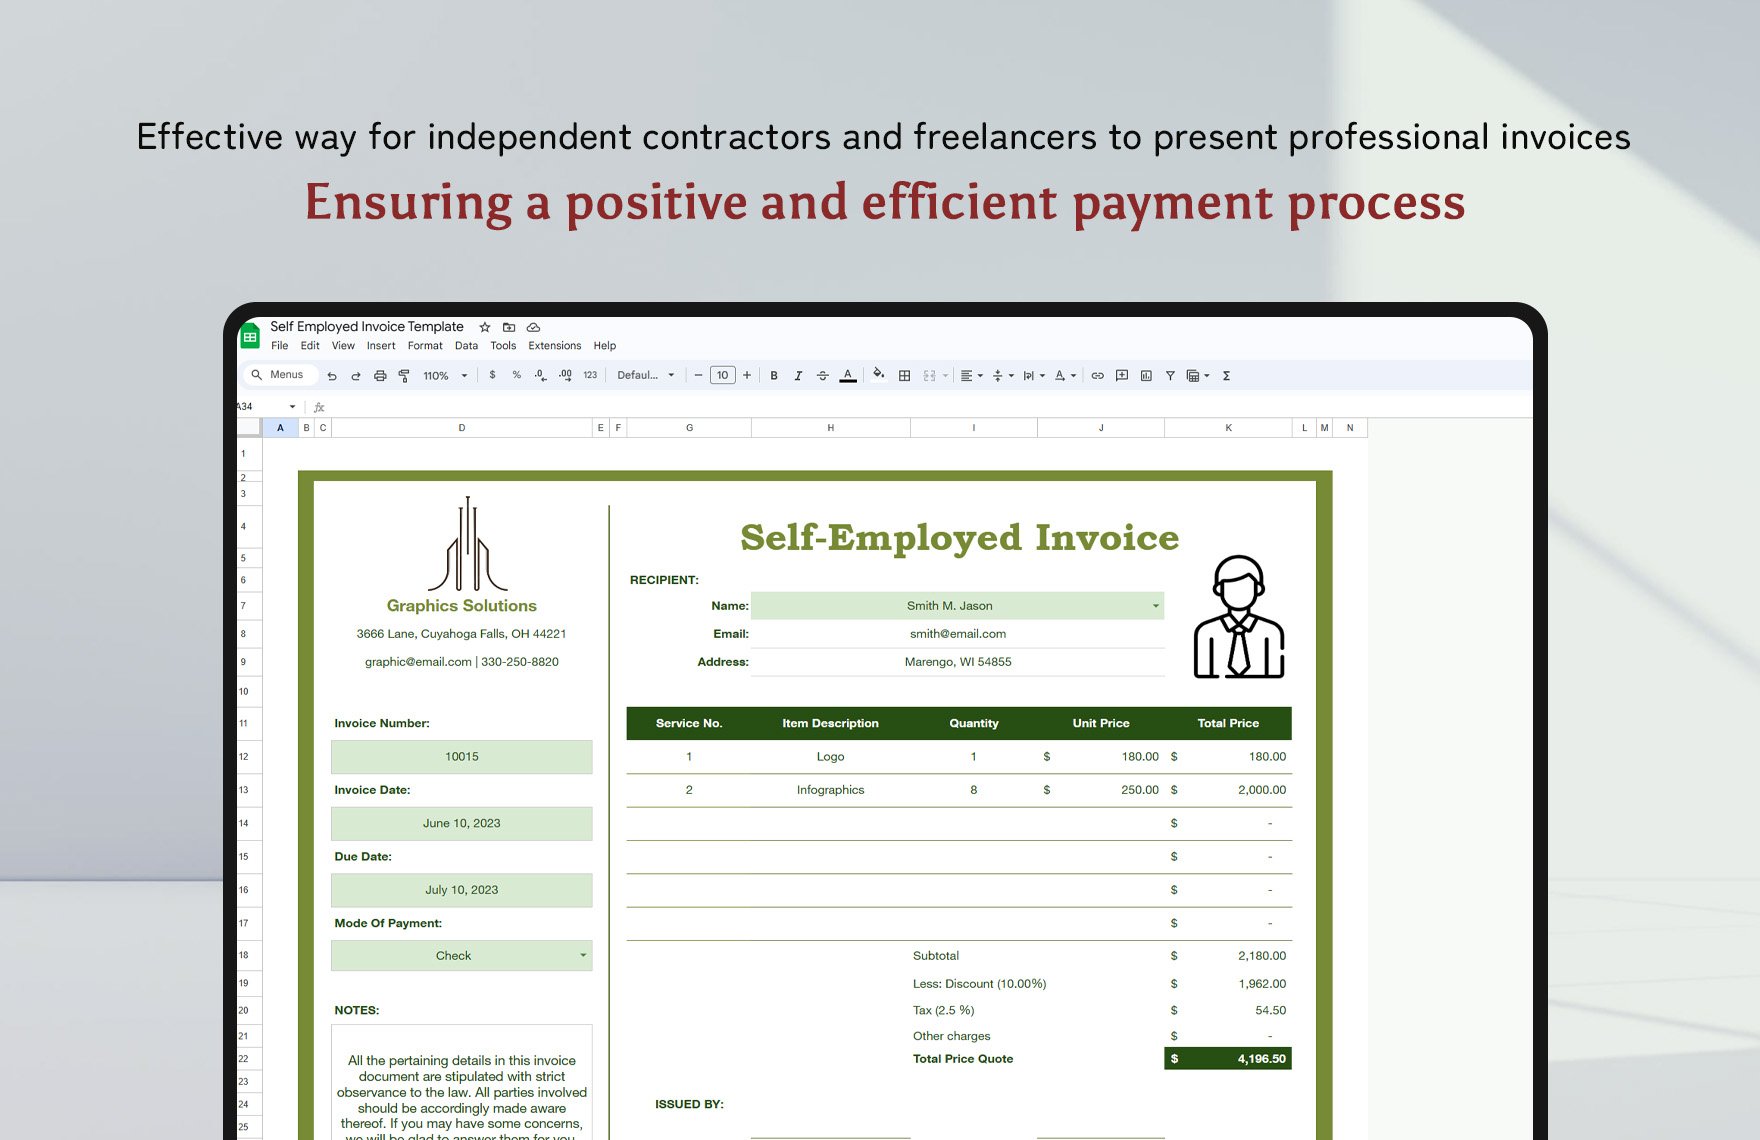 SelfEmployed Invoice Template